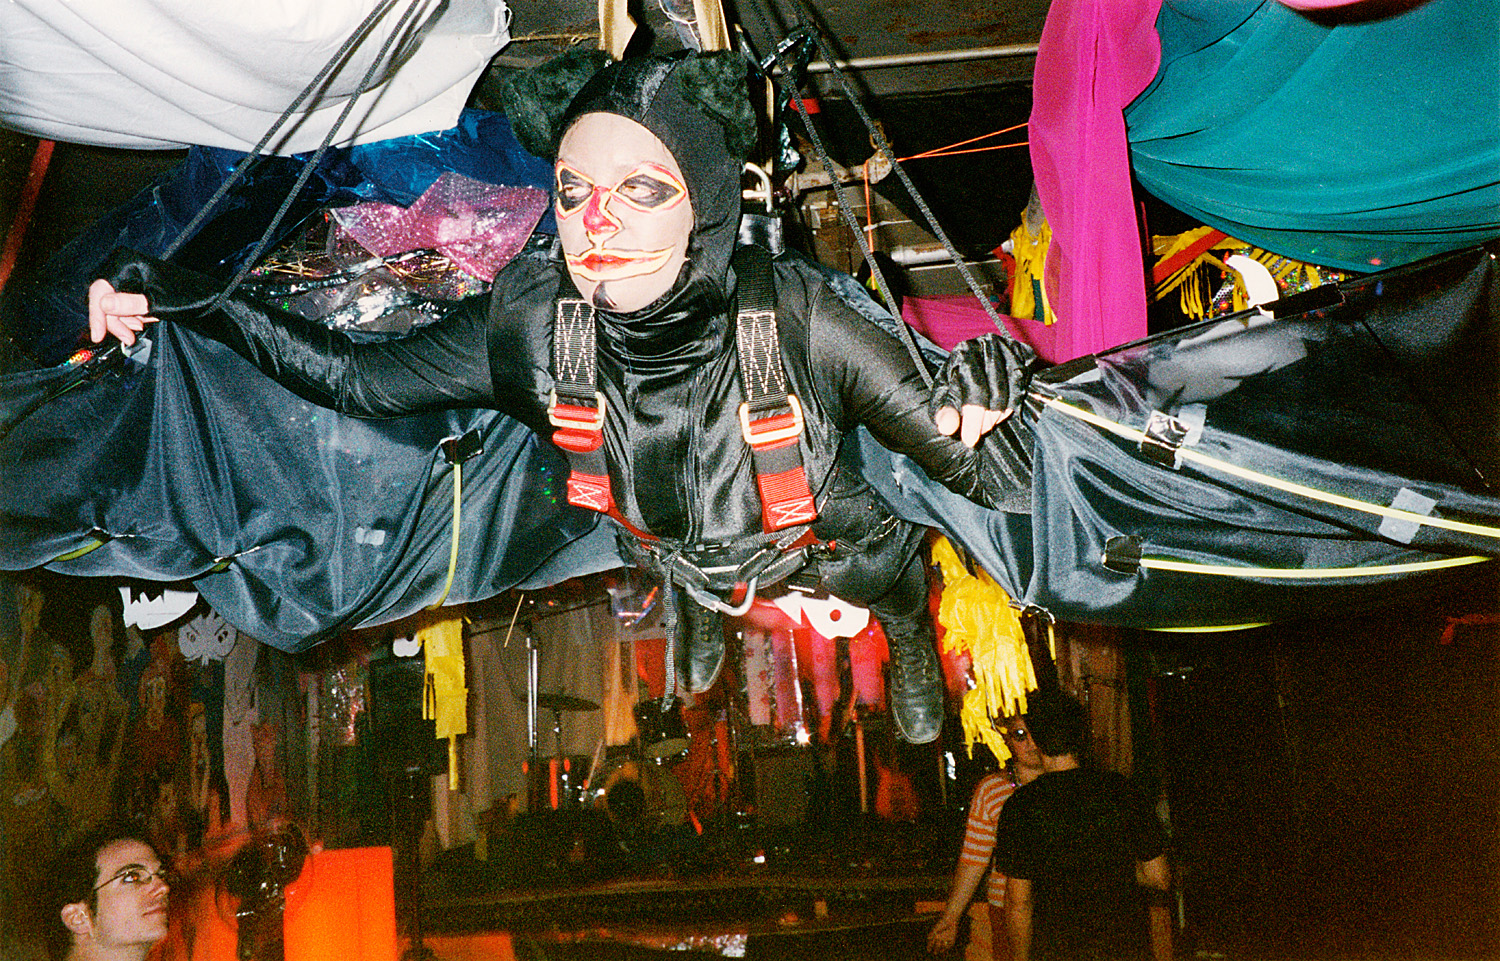  I hung from the ceiling dressed as a bat more times than I can remember. 